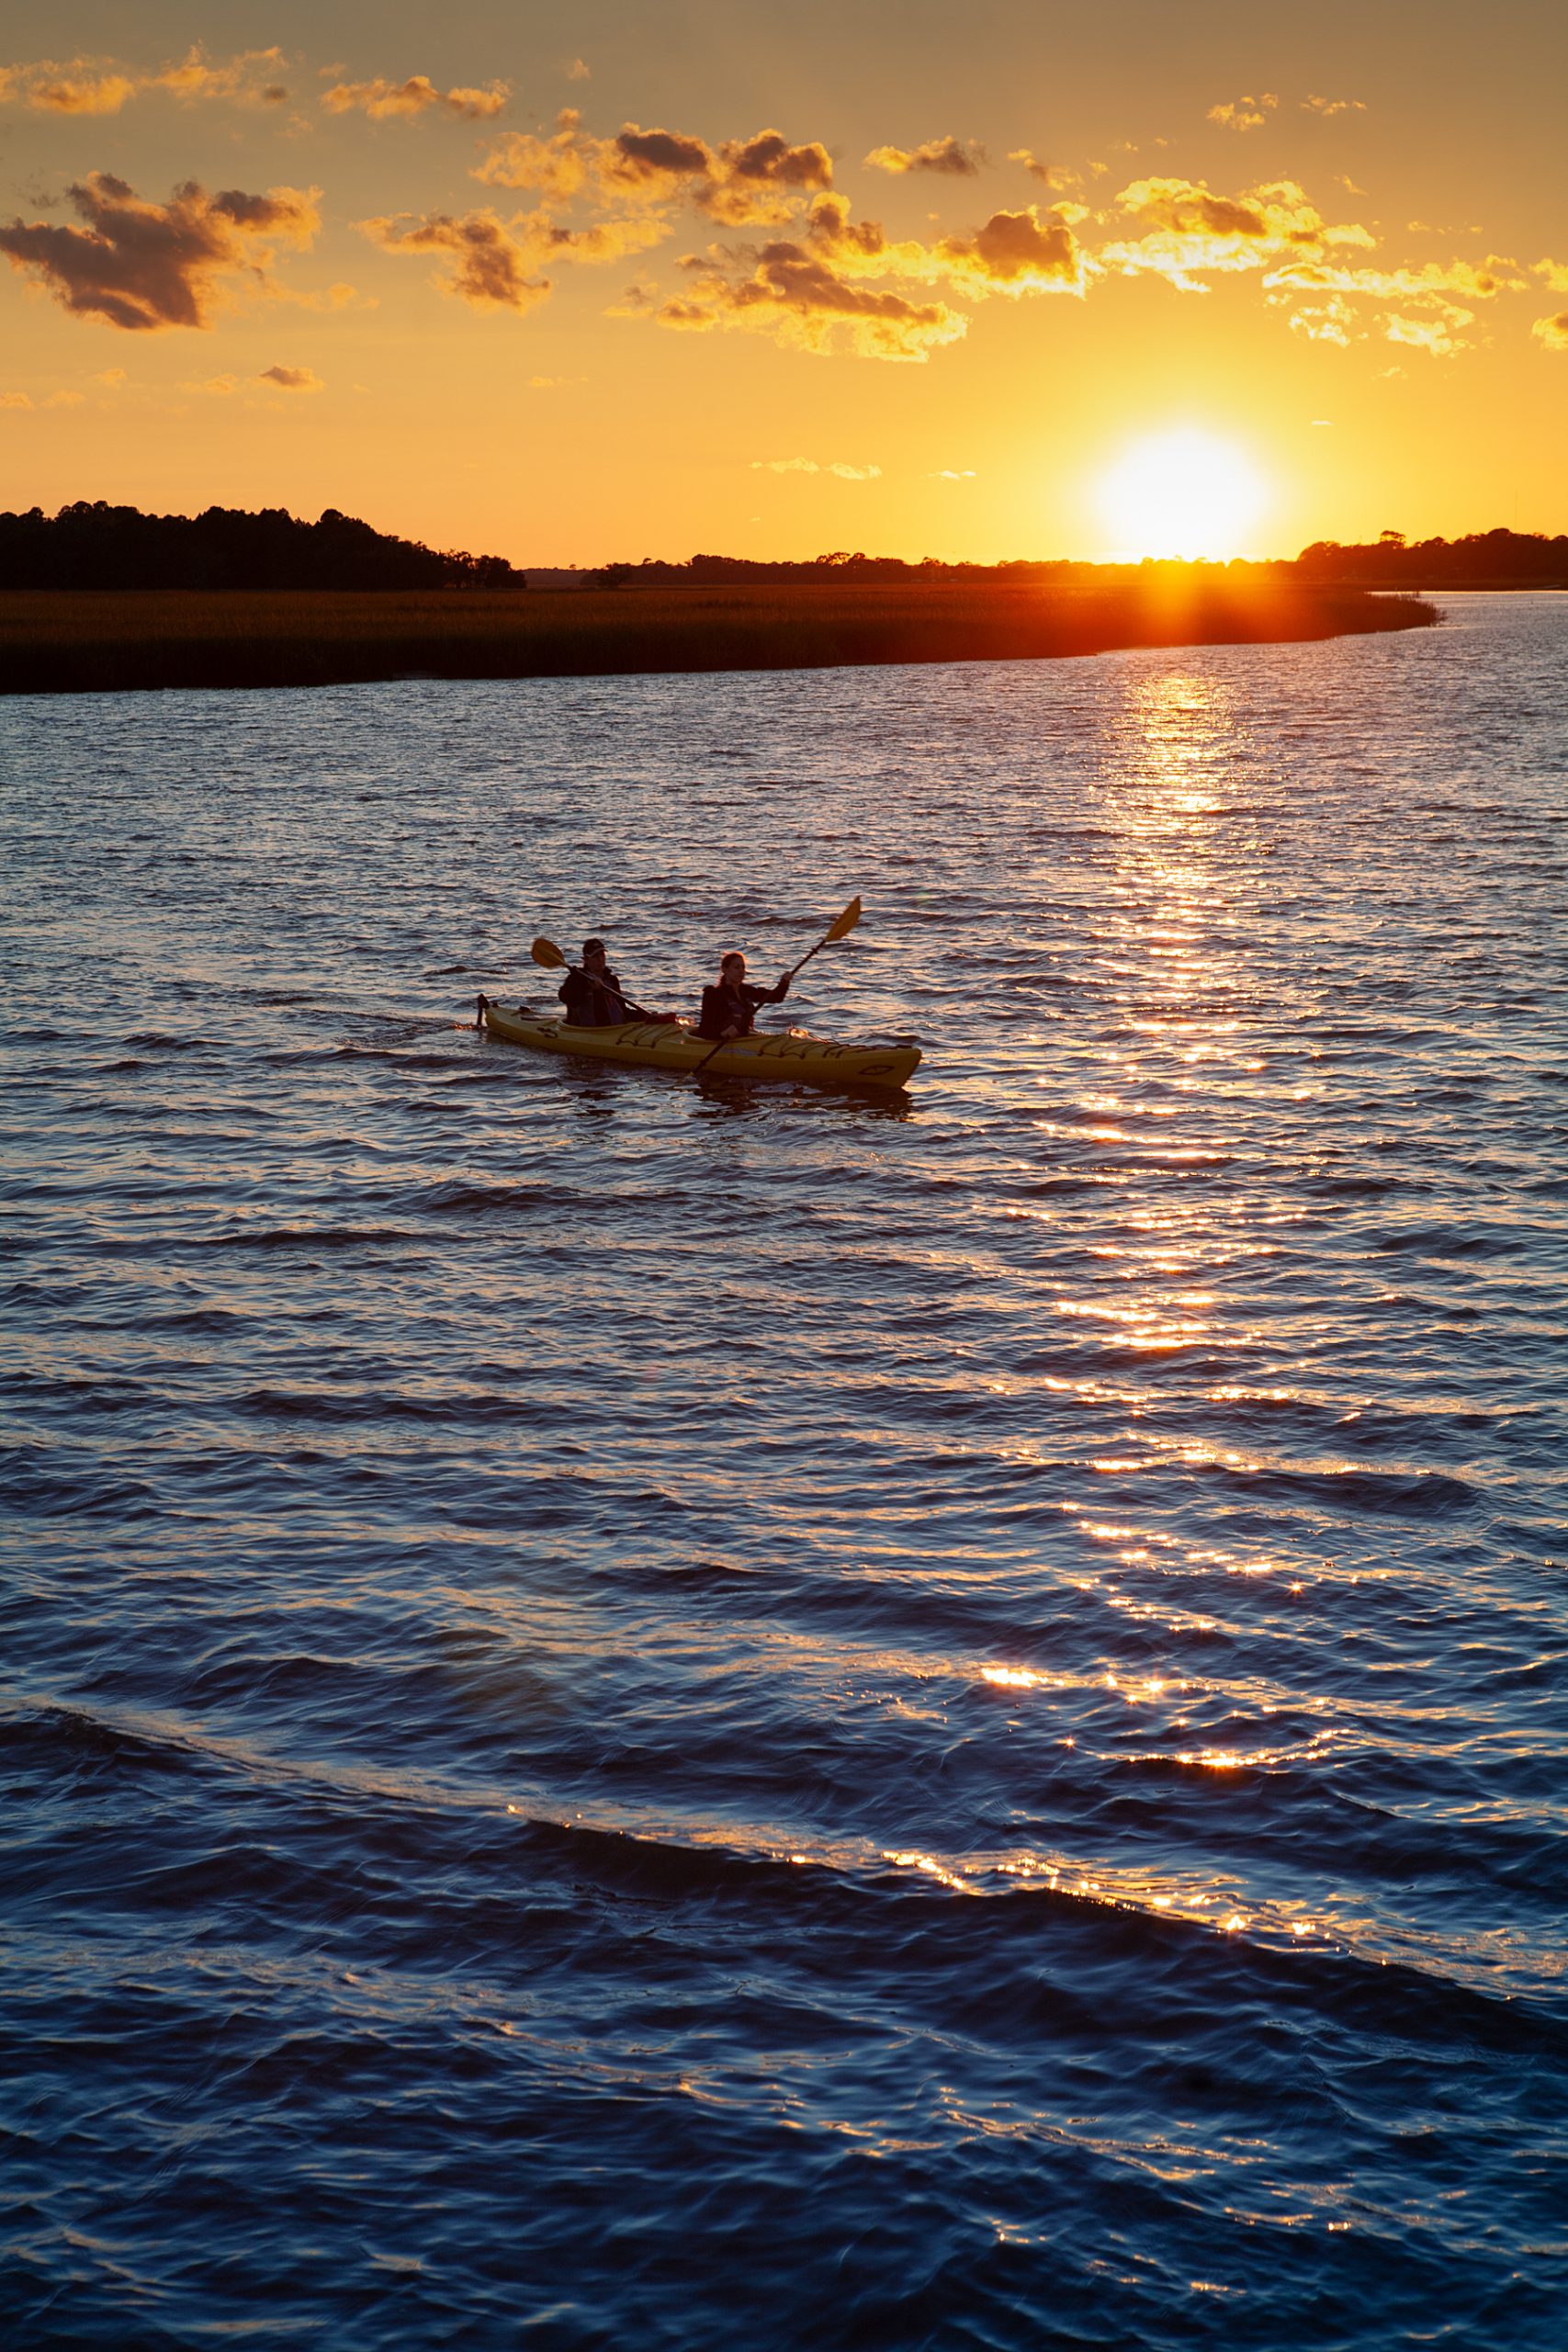 Water is a prominent feature of Folly Beach. Twisting creeks in the marsh, the Folly River, and the Atlantic provide ample opportunities for kayakers to explore and appreciate the beauty of this island. 
